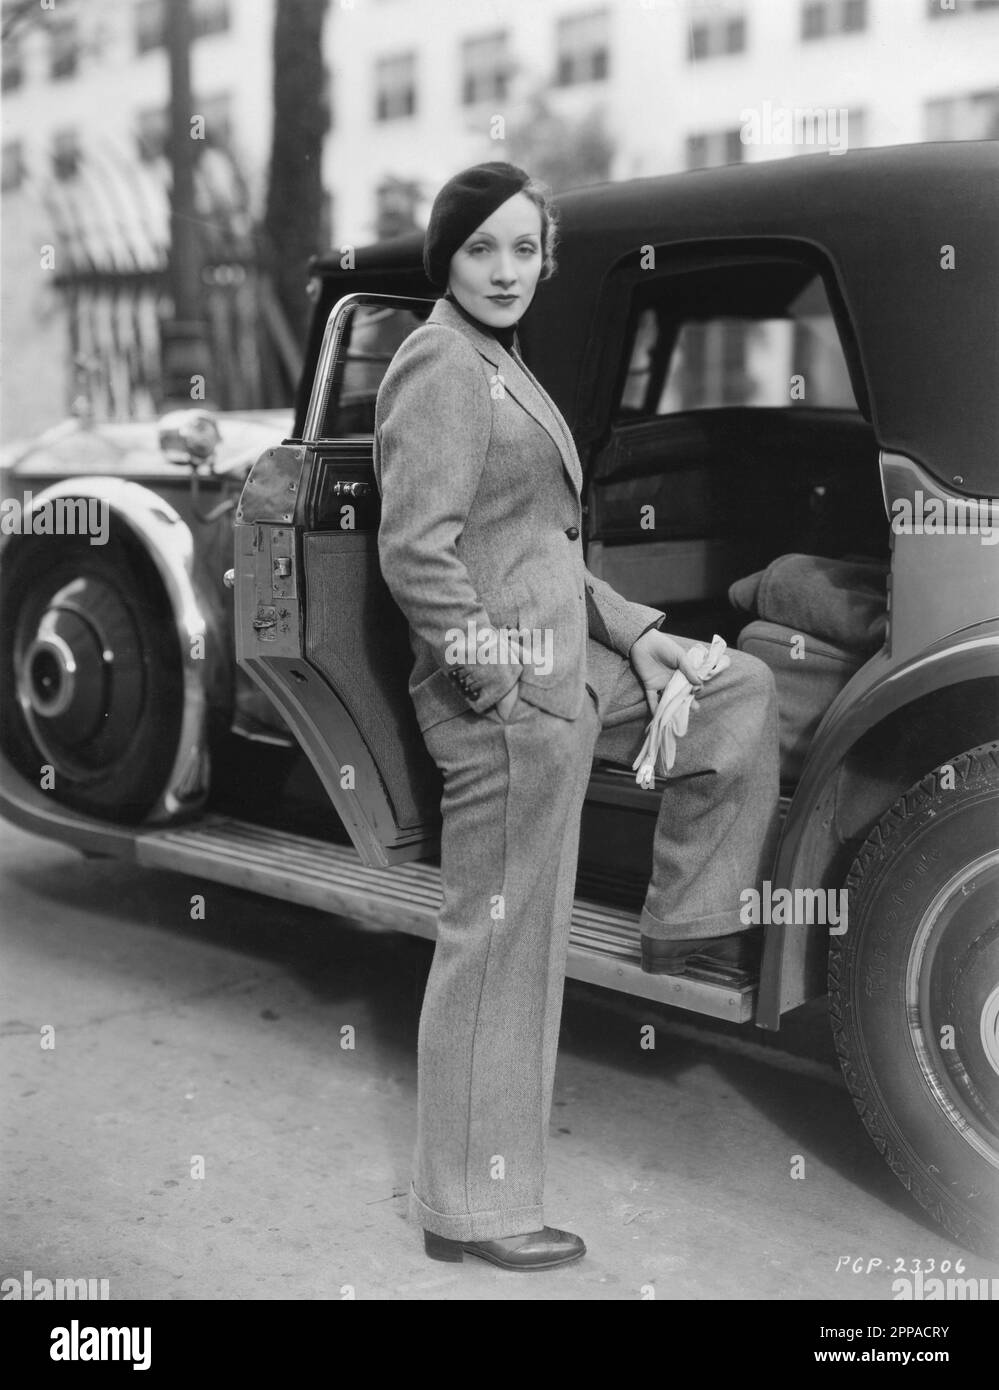 Marlene dietrich trousers Black and White Stock Photos & Images - Alamy